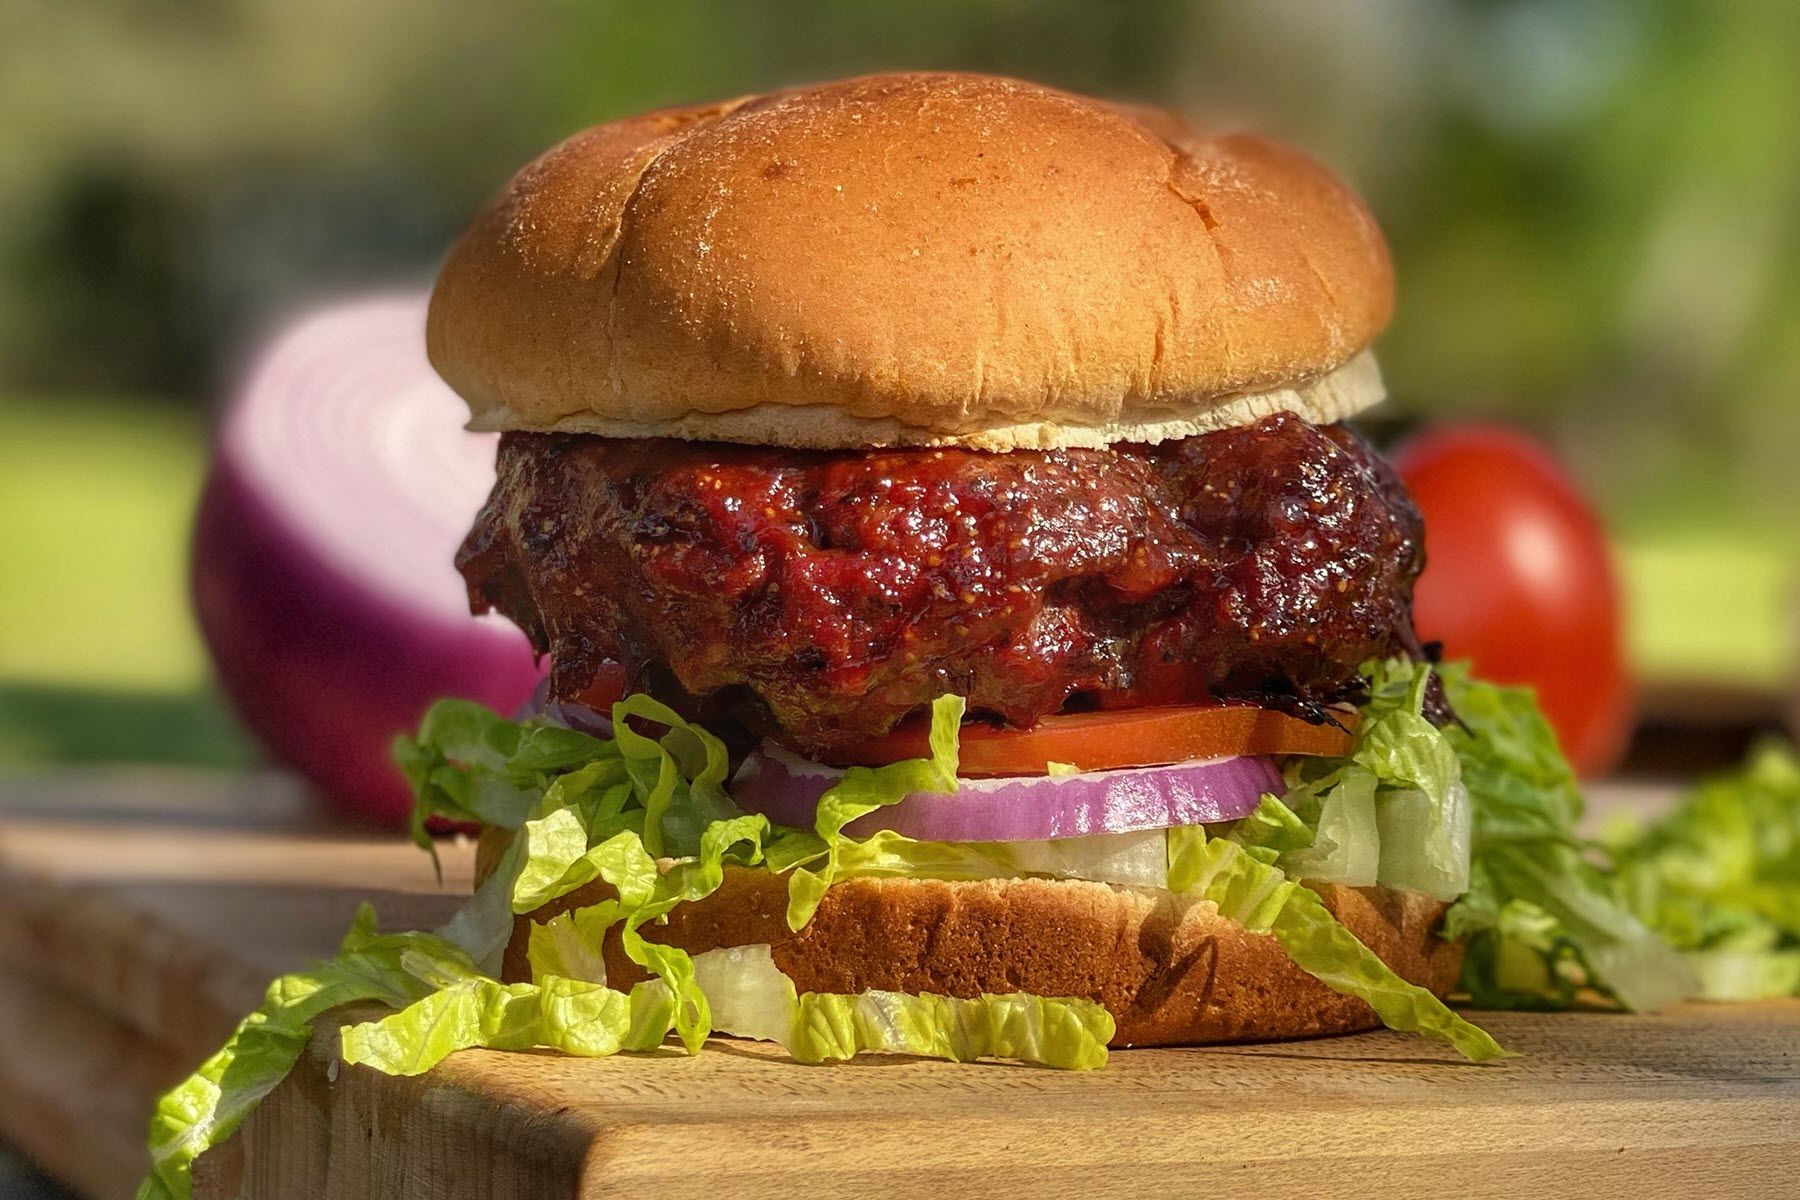 Large burger  on a bun garnished with lettuce, tomato and red onion